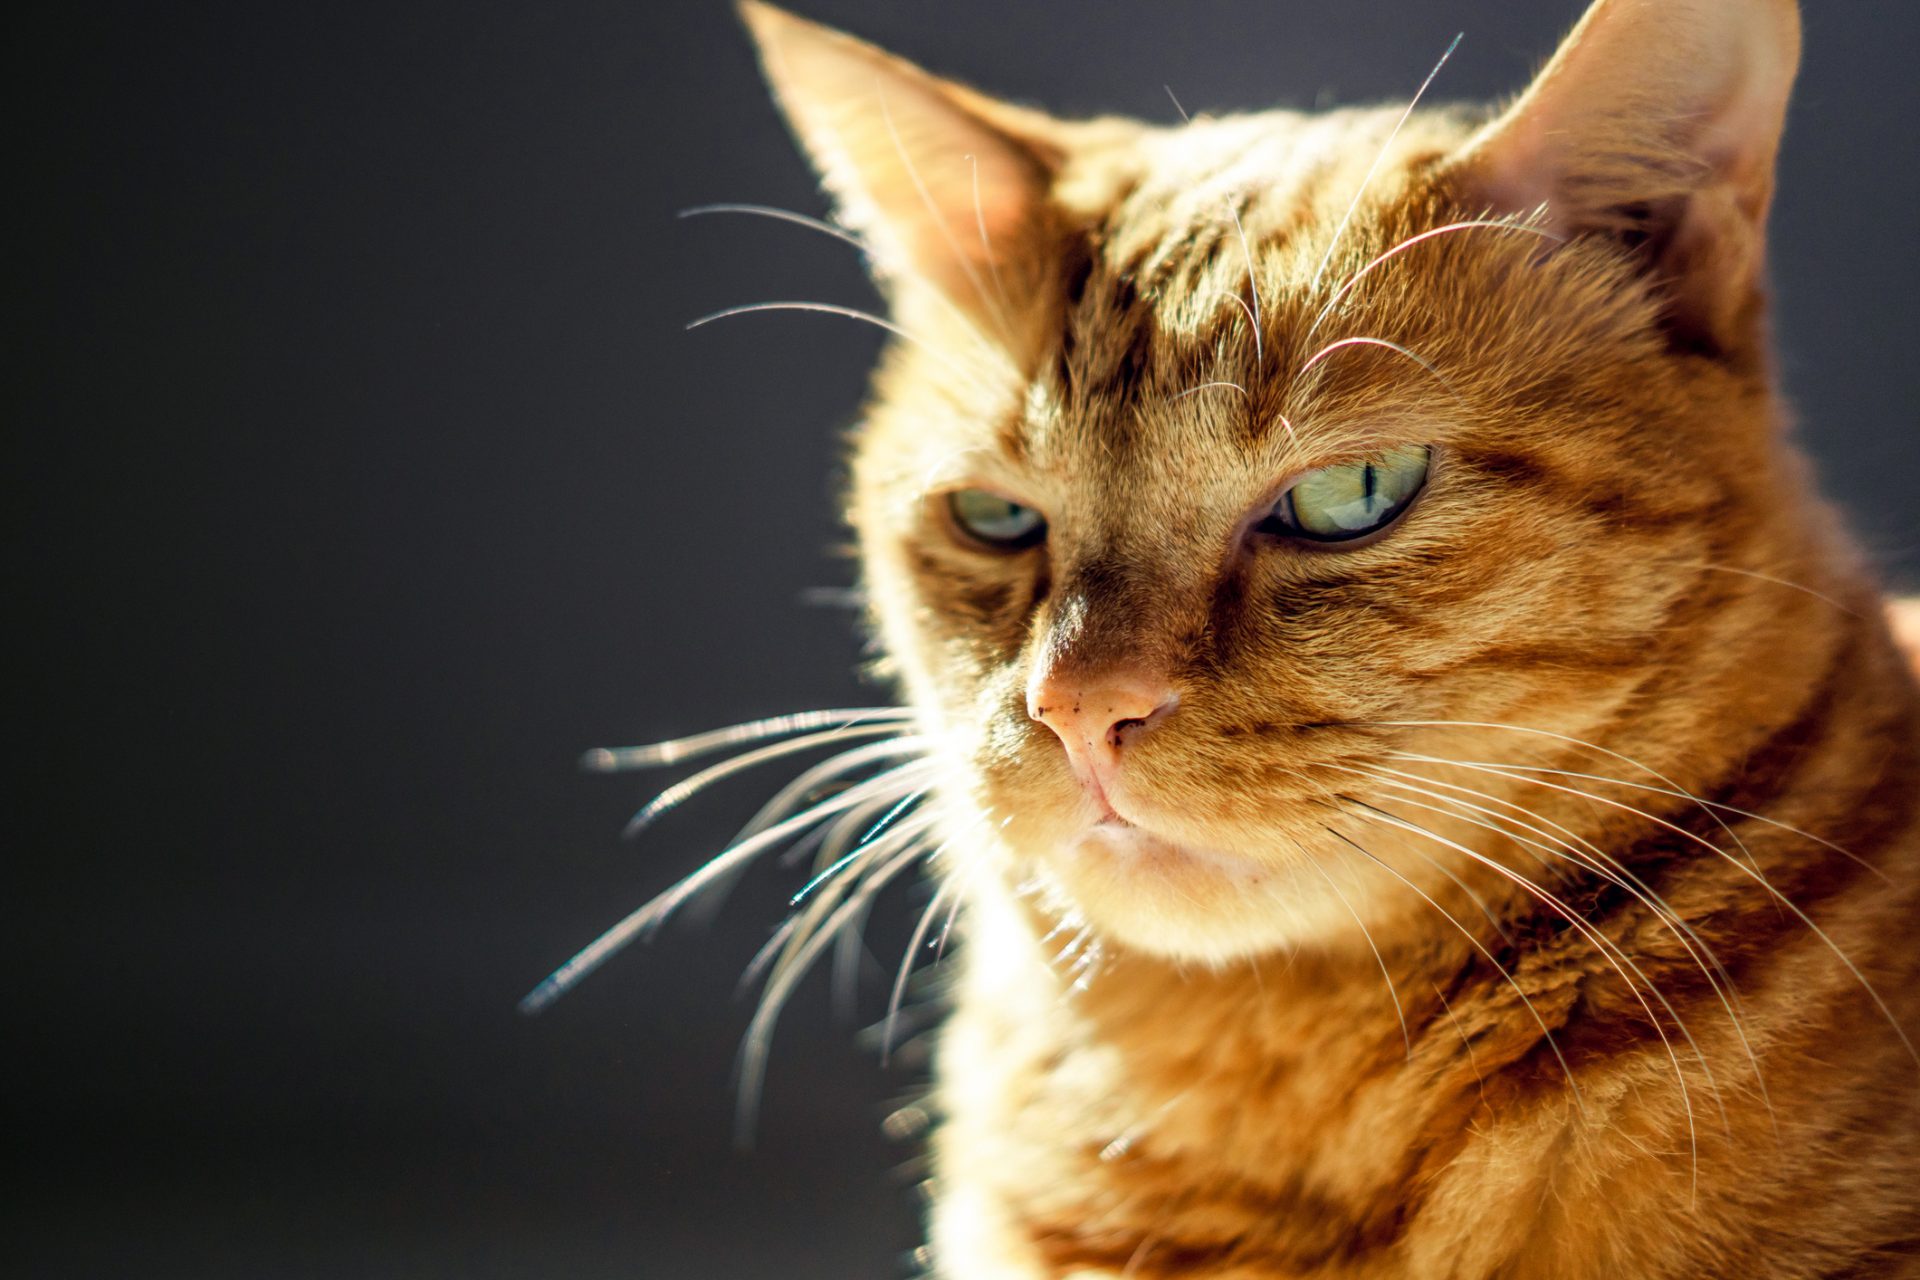 How the CIA tried to teach cats to spy on the Russians